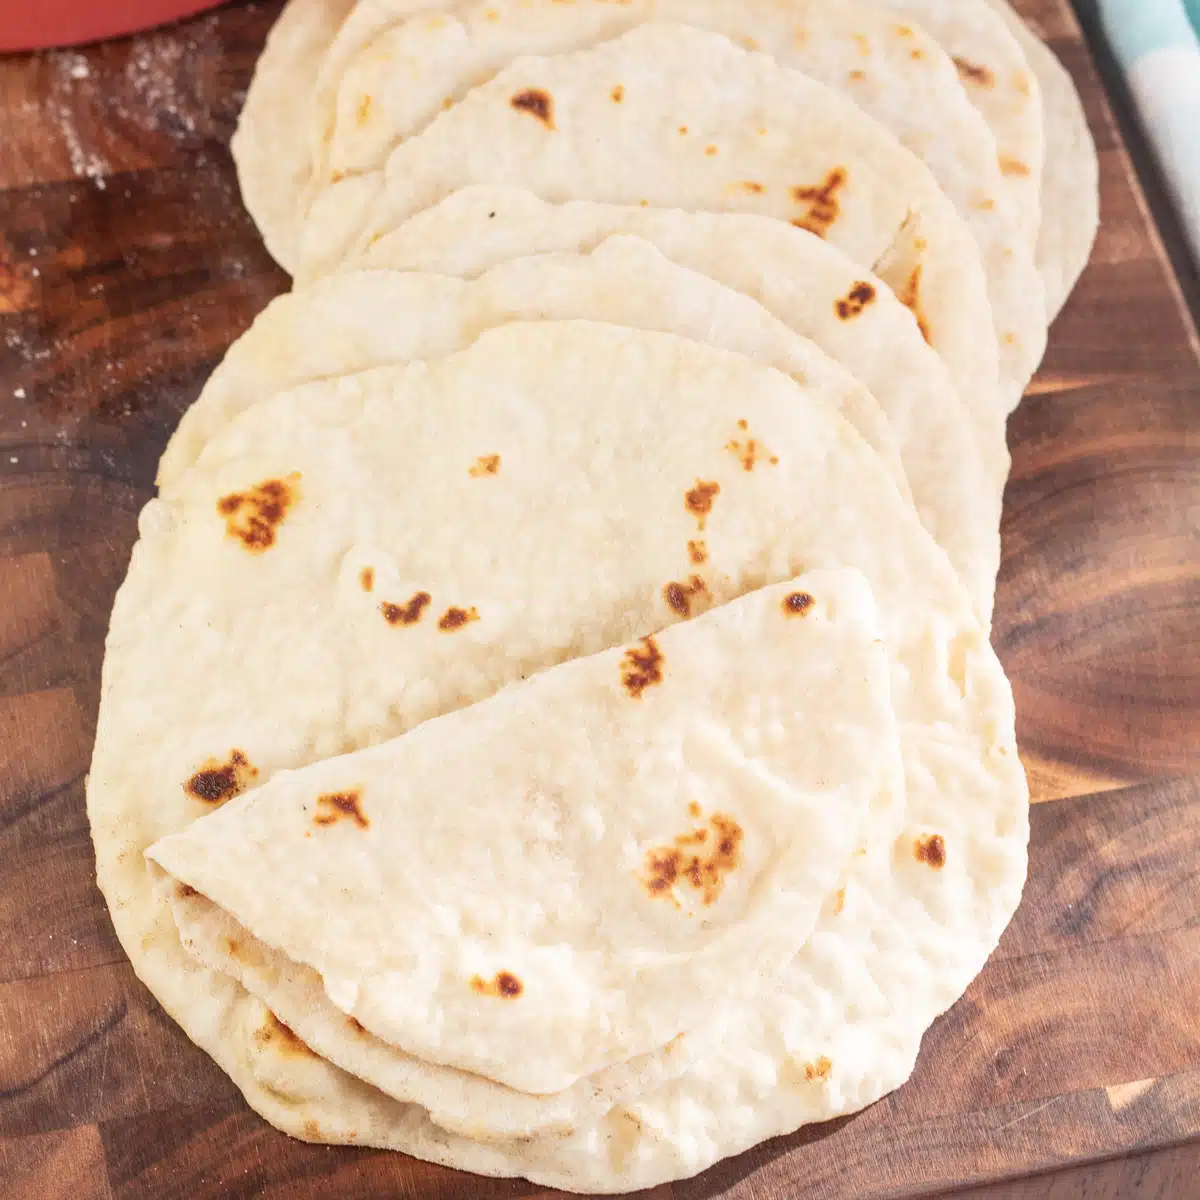 Soft homemade flour tortillas are made using the traditional ingredients lard, flour, salt, water and fried until golden.